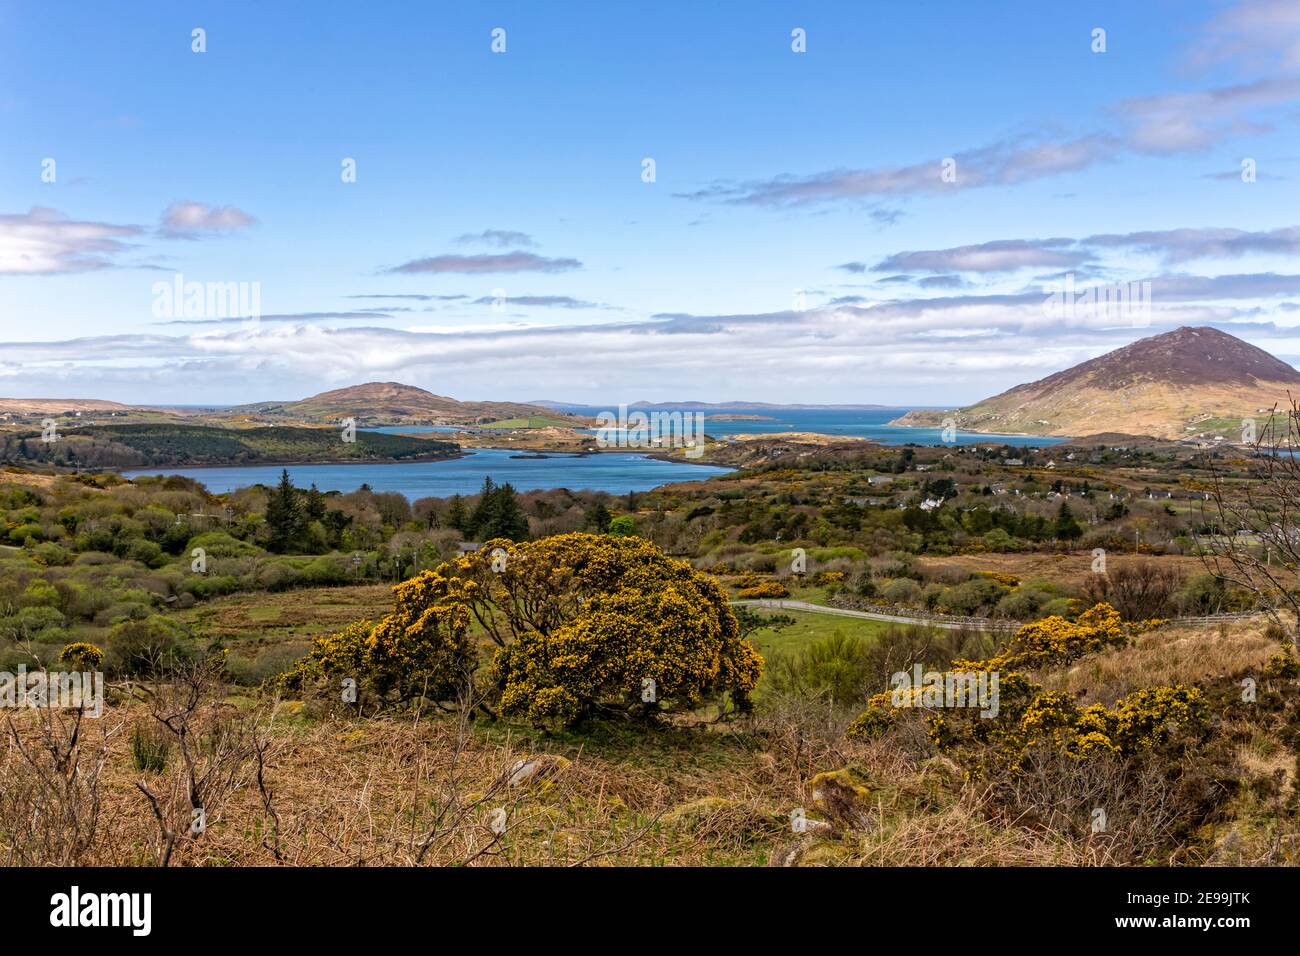 Letterfrack, County Galway, Ireland. 25th April, 2016. Landscape in the Connemara region, Letterfrack, Greenmount, County Galway, Ireland. Stock Photo